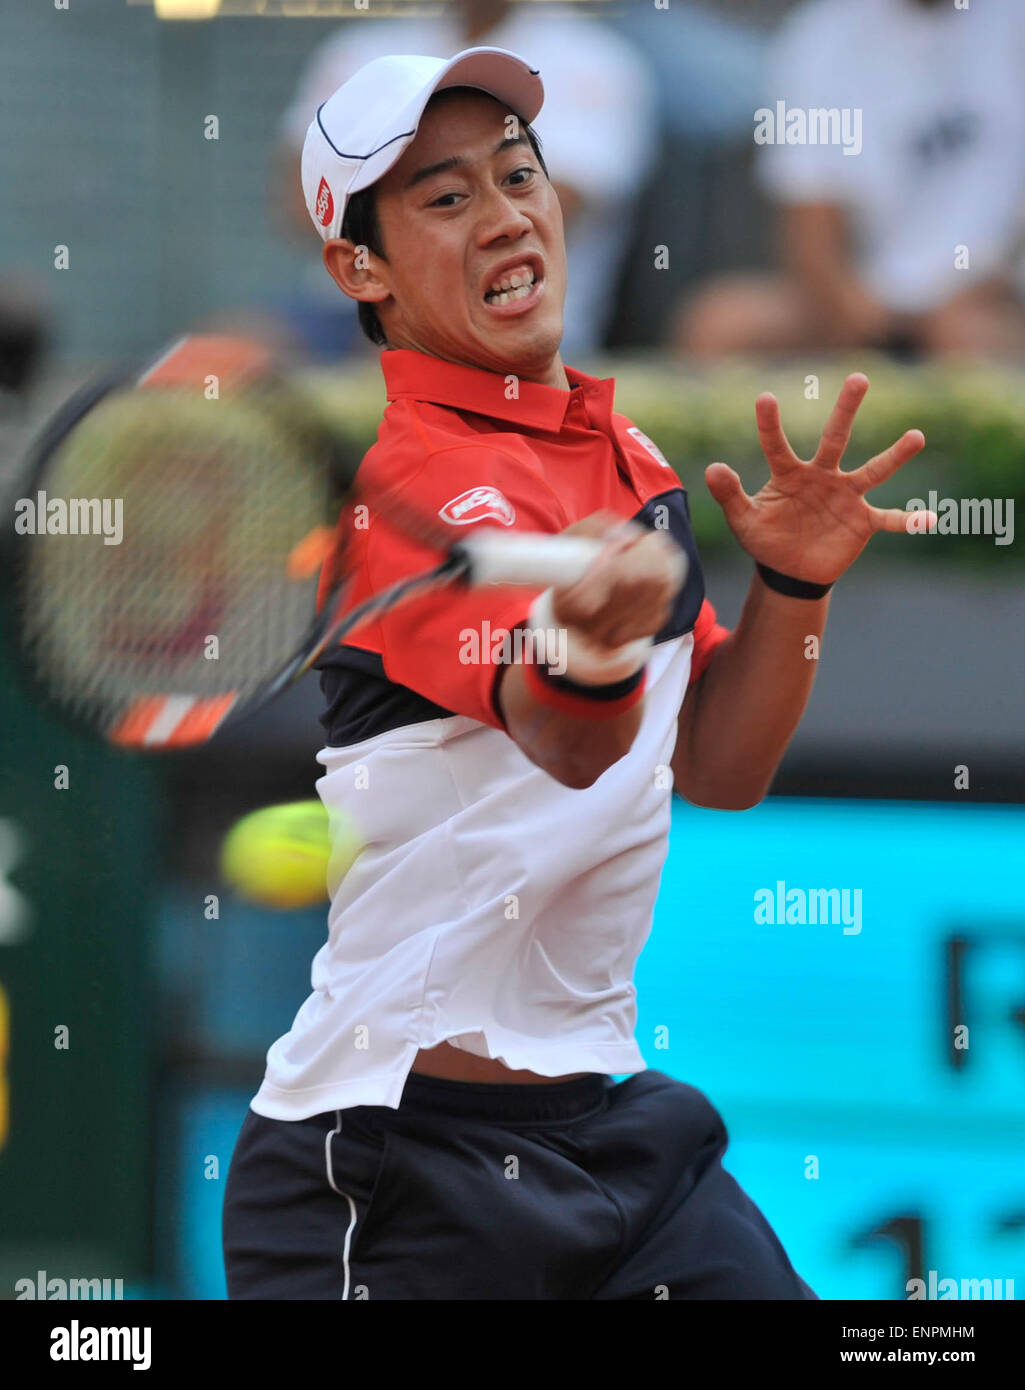 Madrid, Spain. 9th May, 2015. Kei Nishikori of Japan hits a return during a men's singles semifinal match against Andy Murray of Britain at the Madrid Open tennis tournament in Madrid, Spain, May 9, 2015. Kei Nishikori lost 0-2. Credit:  Xie Haining/Xinhua/Alamy Live News Stock Photo